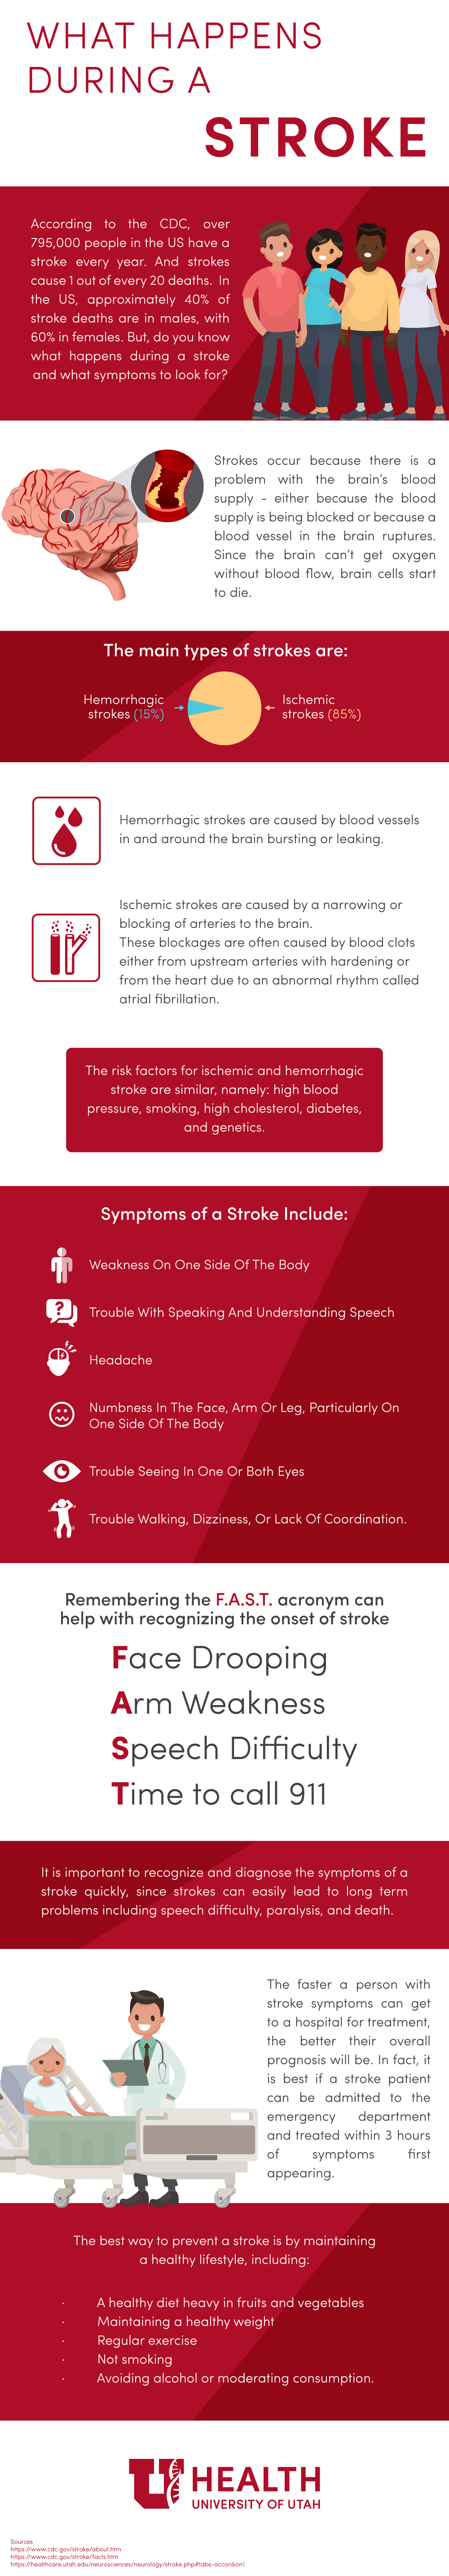 Stroke Facts Infographic